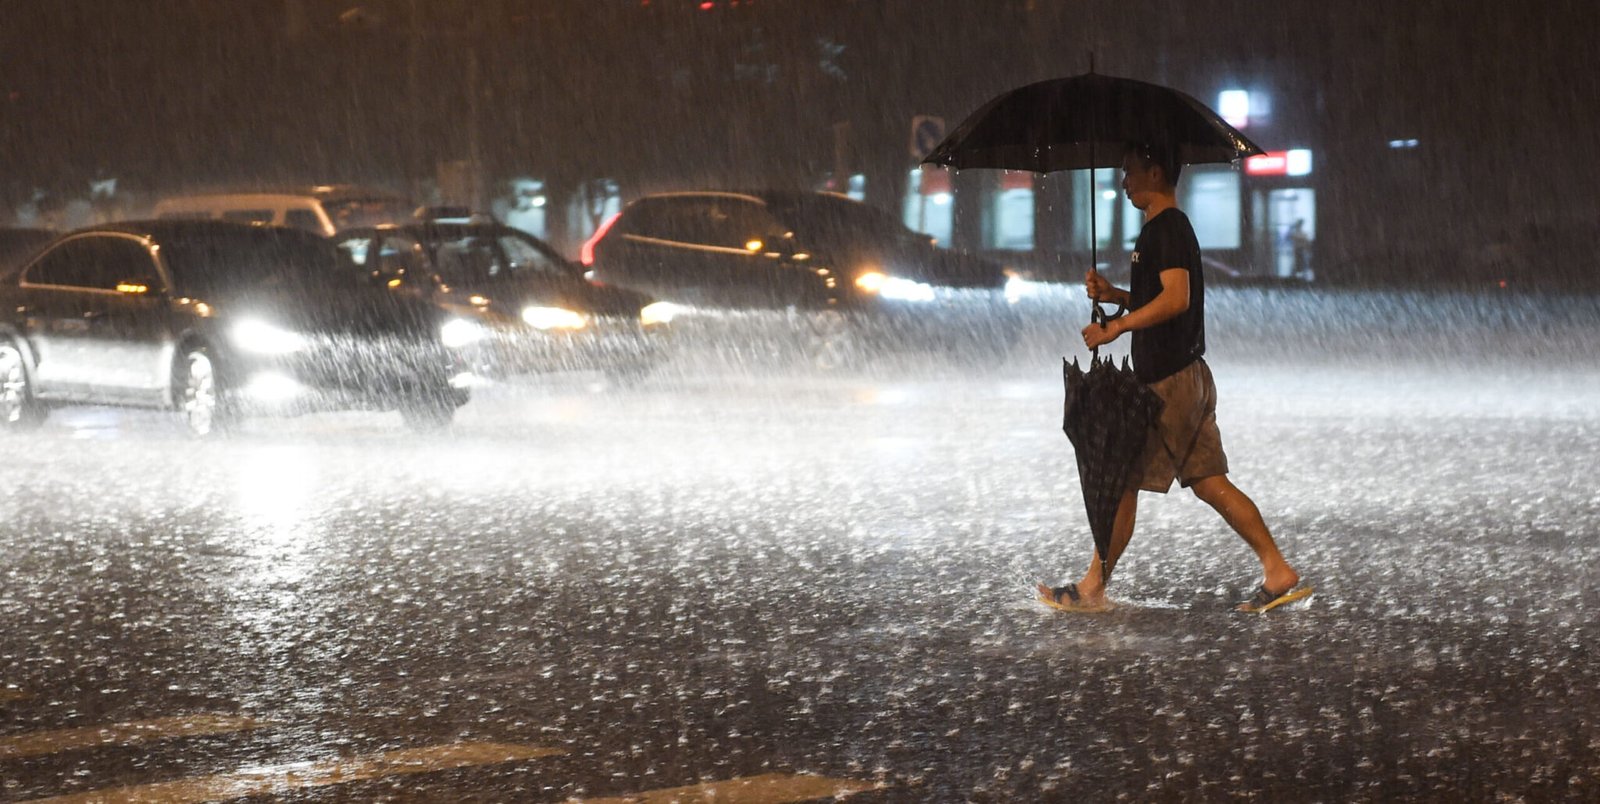 A citizen walks at a rainy night in Beijing